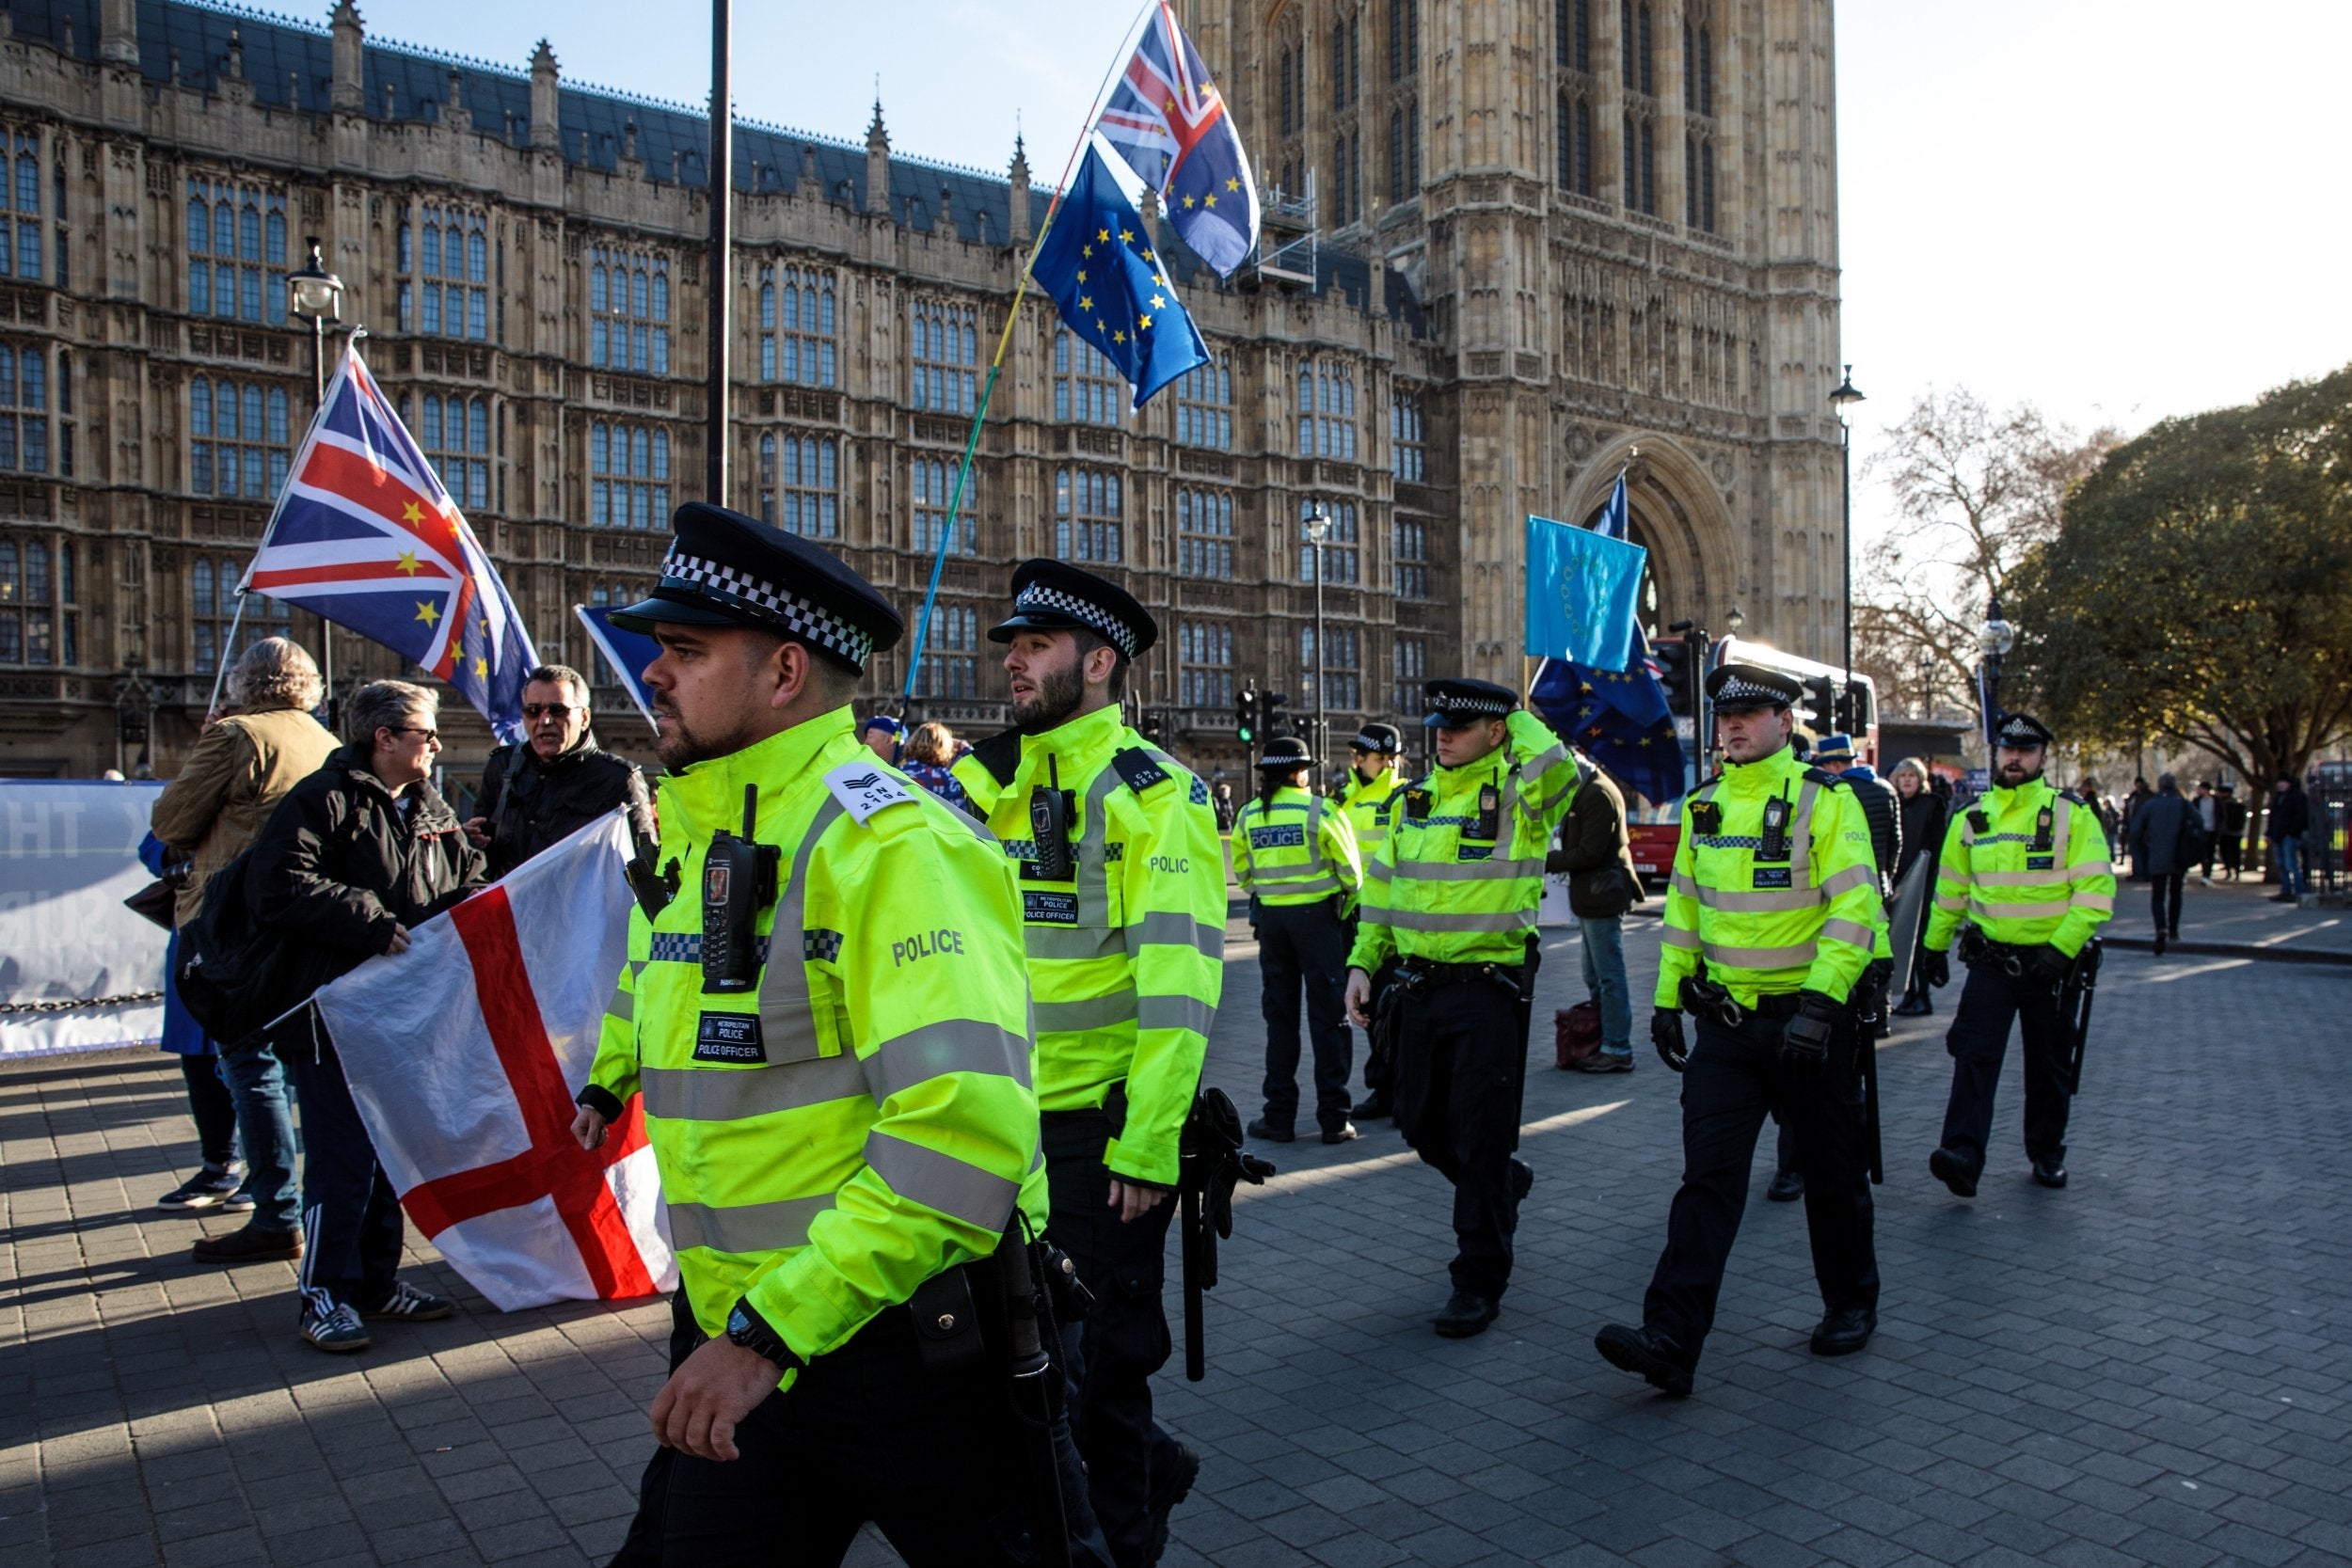 Police patrol as Brexit protesters demonstrate outside the Houses of Parliament